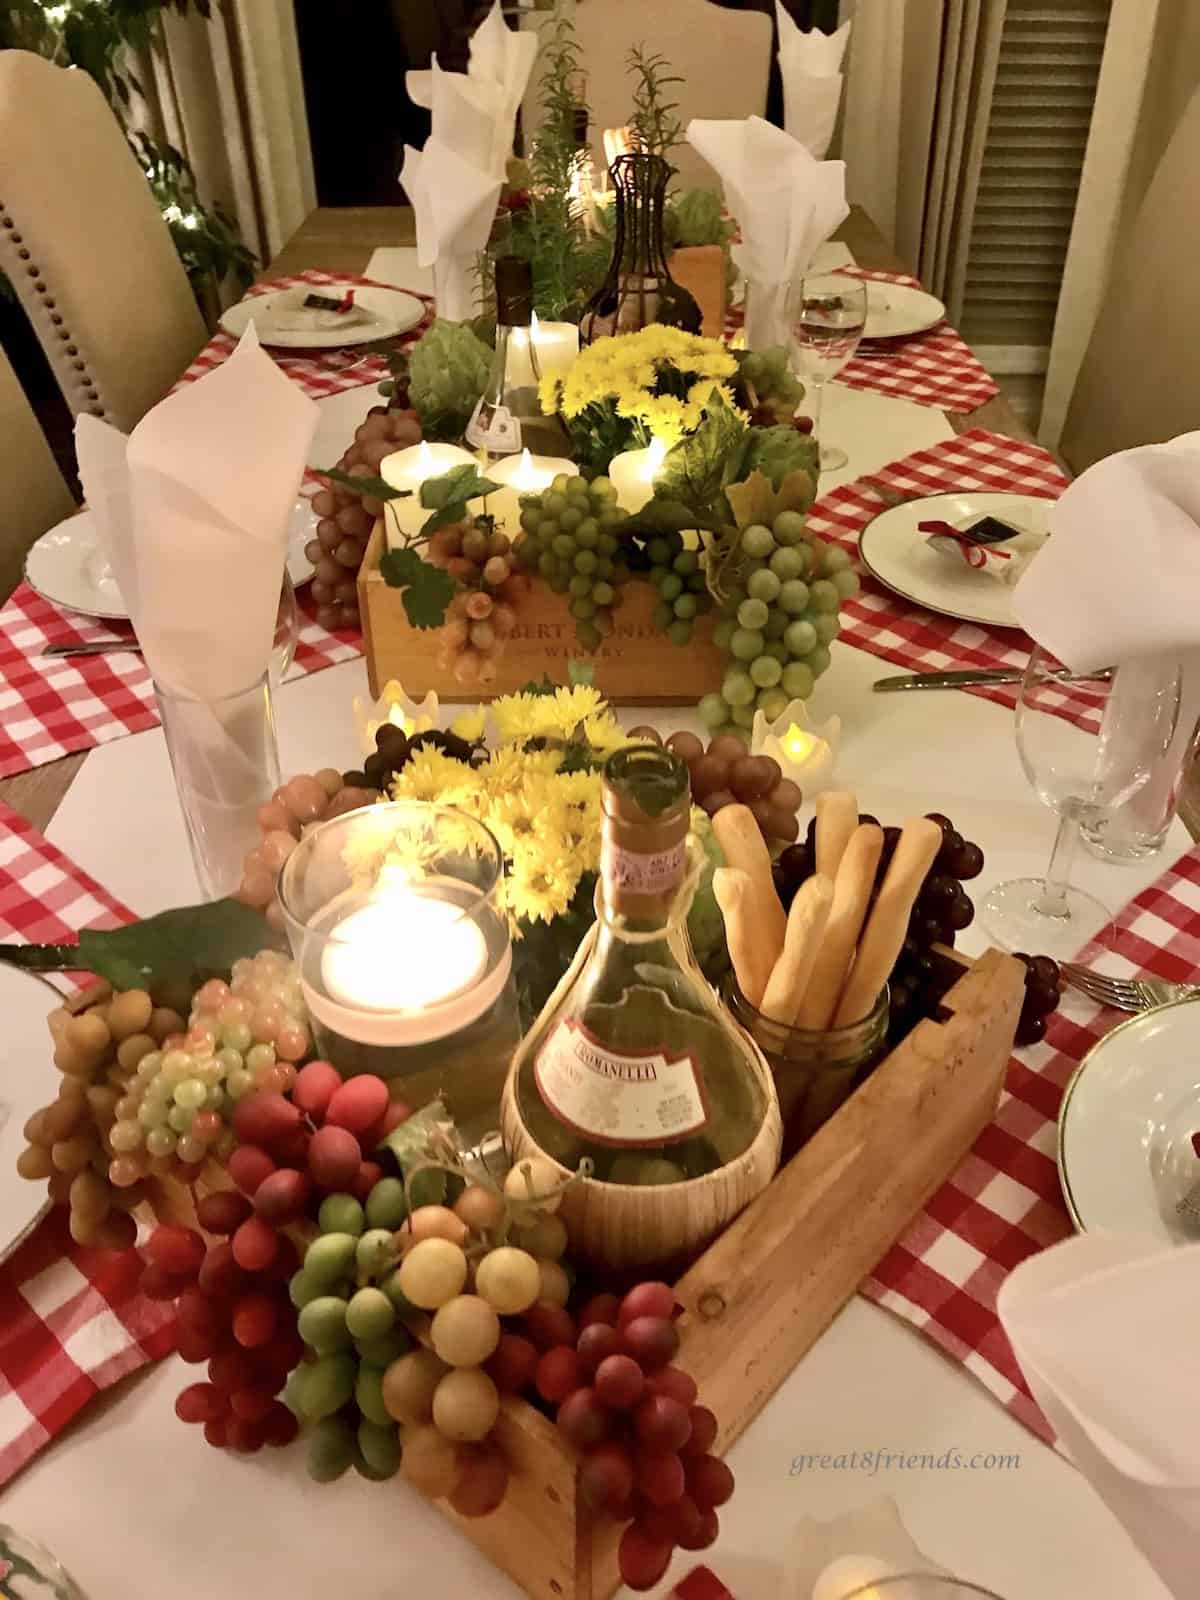 Table setting with a Chicago's Little Italy theme using red and white checked linen and flowers, chianti bottles, plastic grapes and candles. 